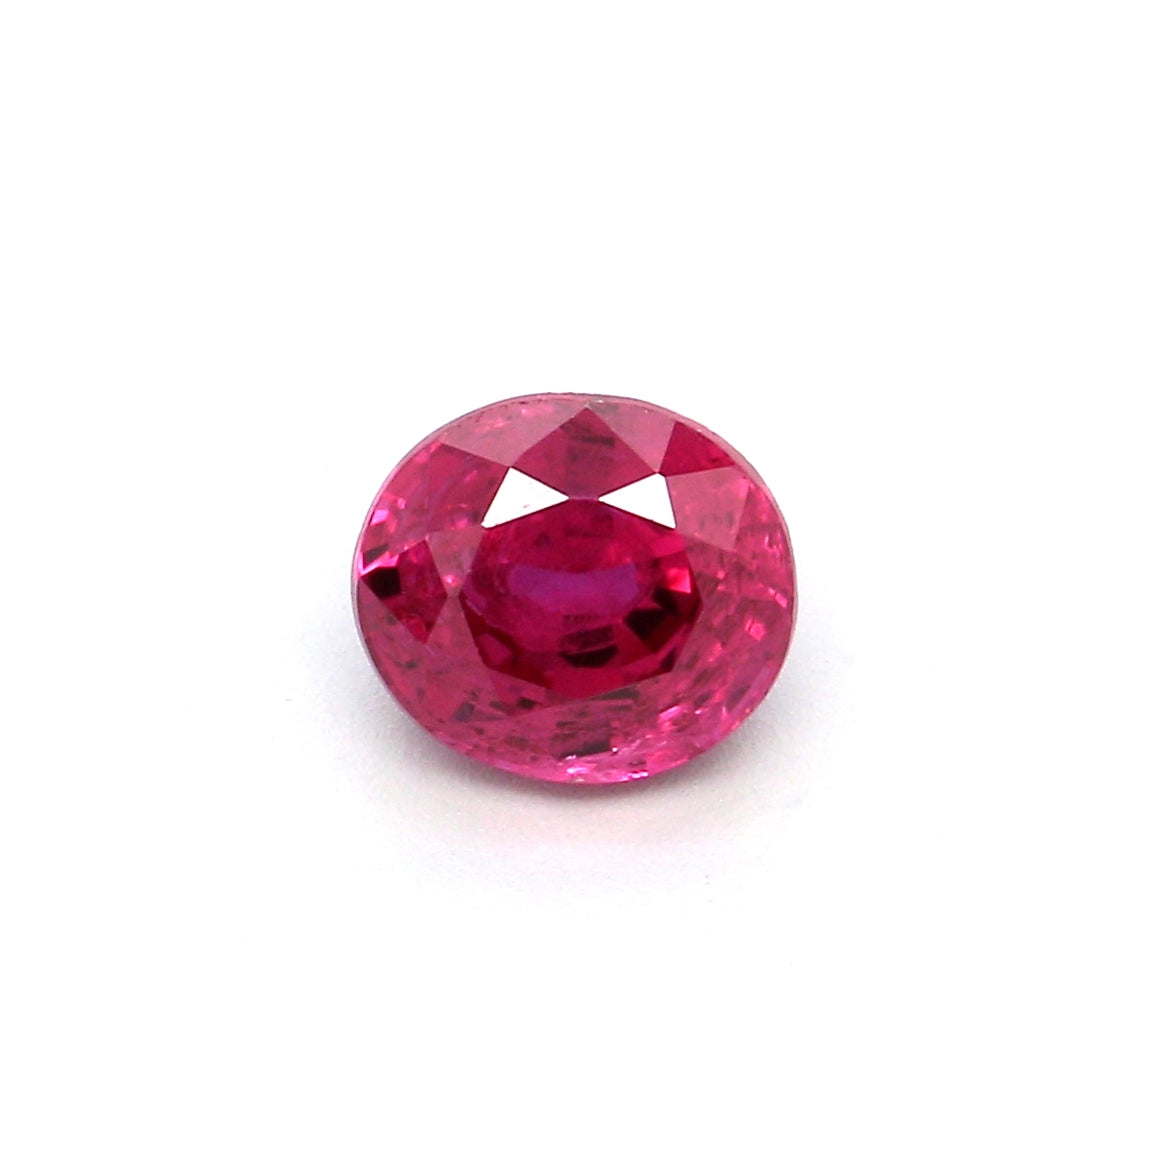 0.56ct Pinkish Red, Oval Ruby, H(a), Thailand - 4.90 x 4.32 x 3.18mm